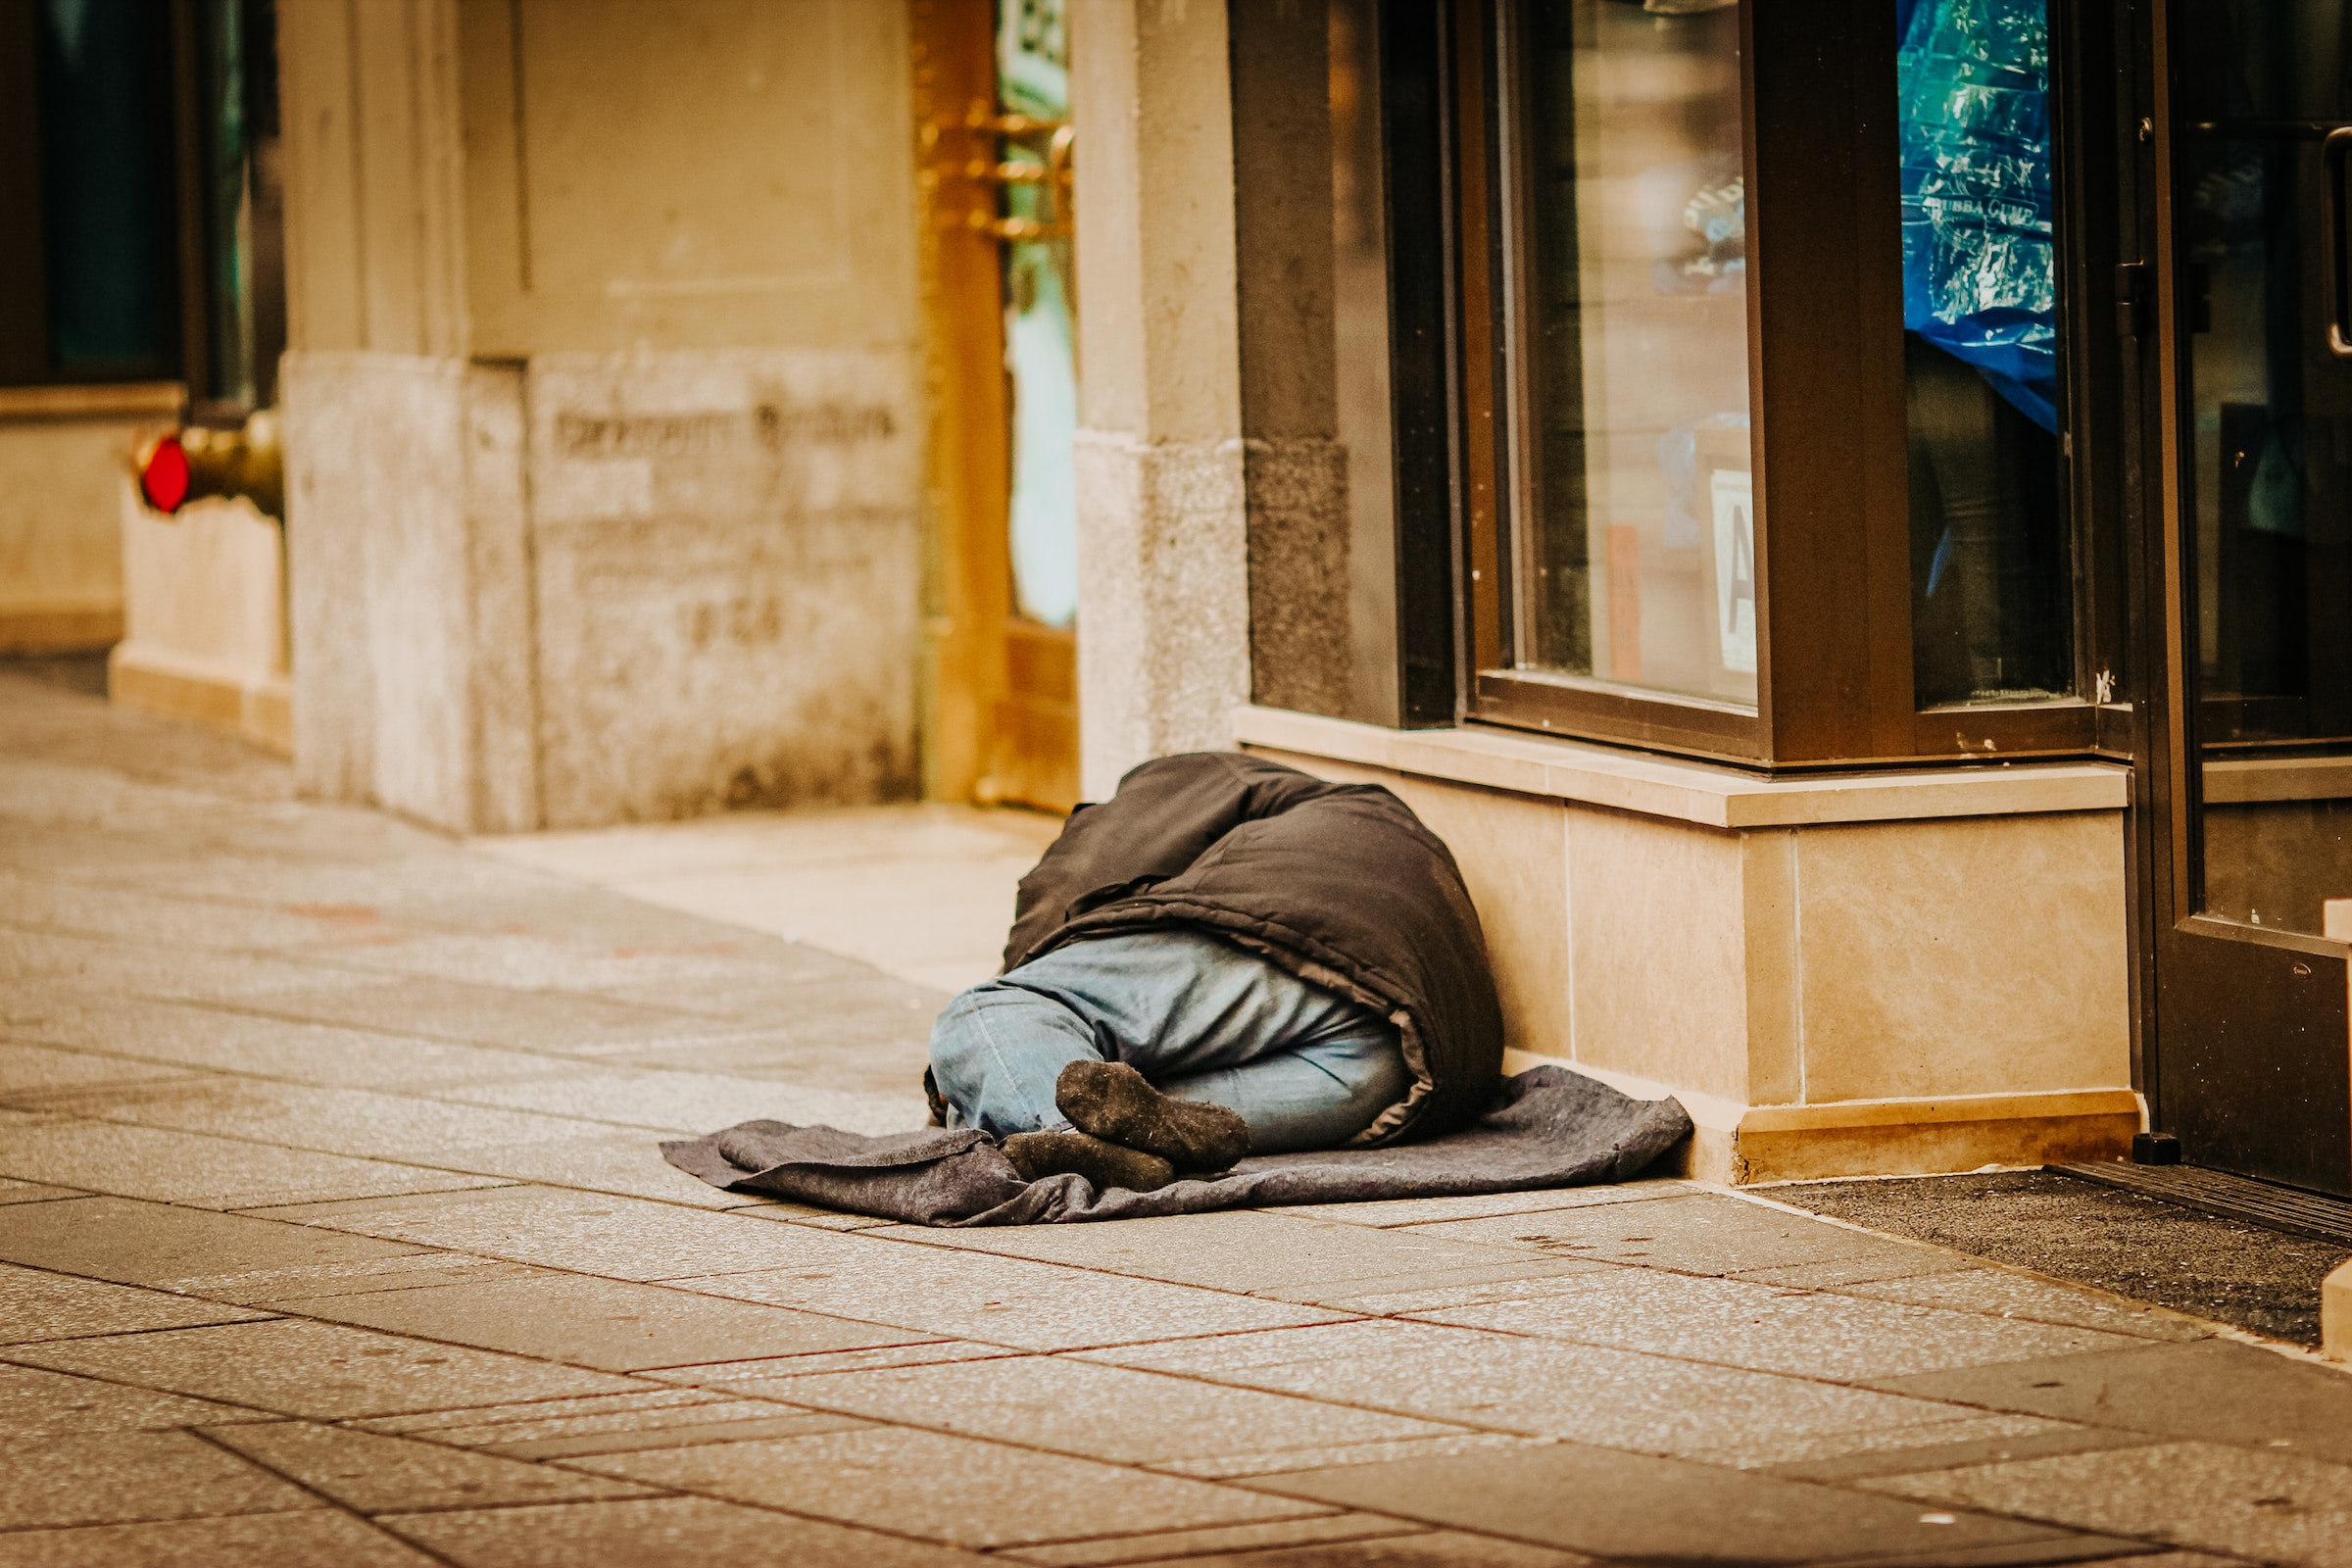 $300-million-allocation-to-tackle-homelessness-in-california